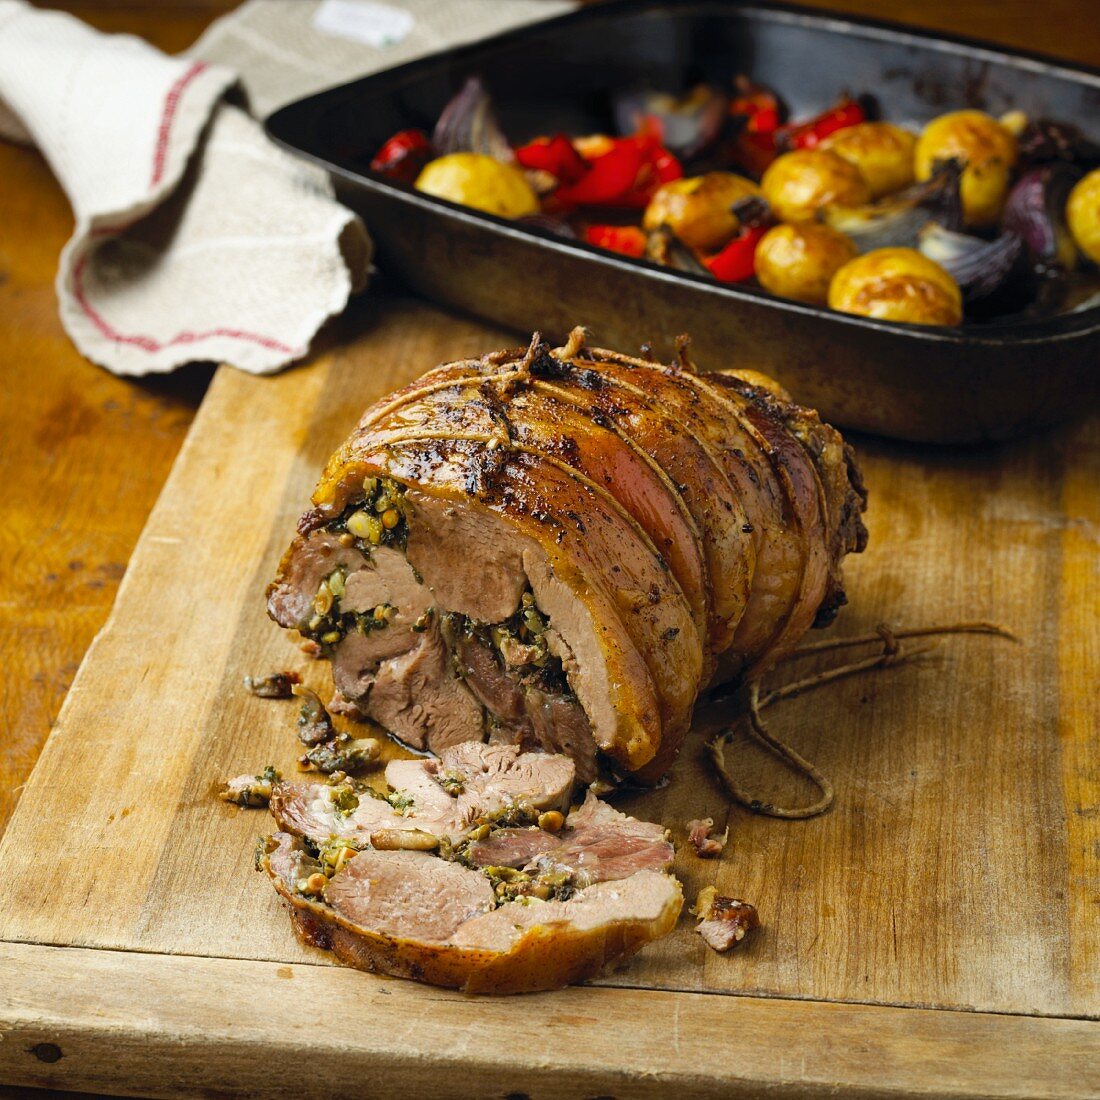 Lamb roulade with oven-roasted vegetables